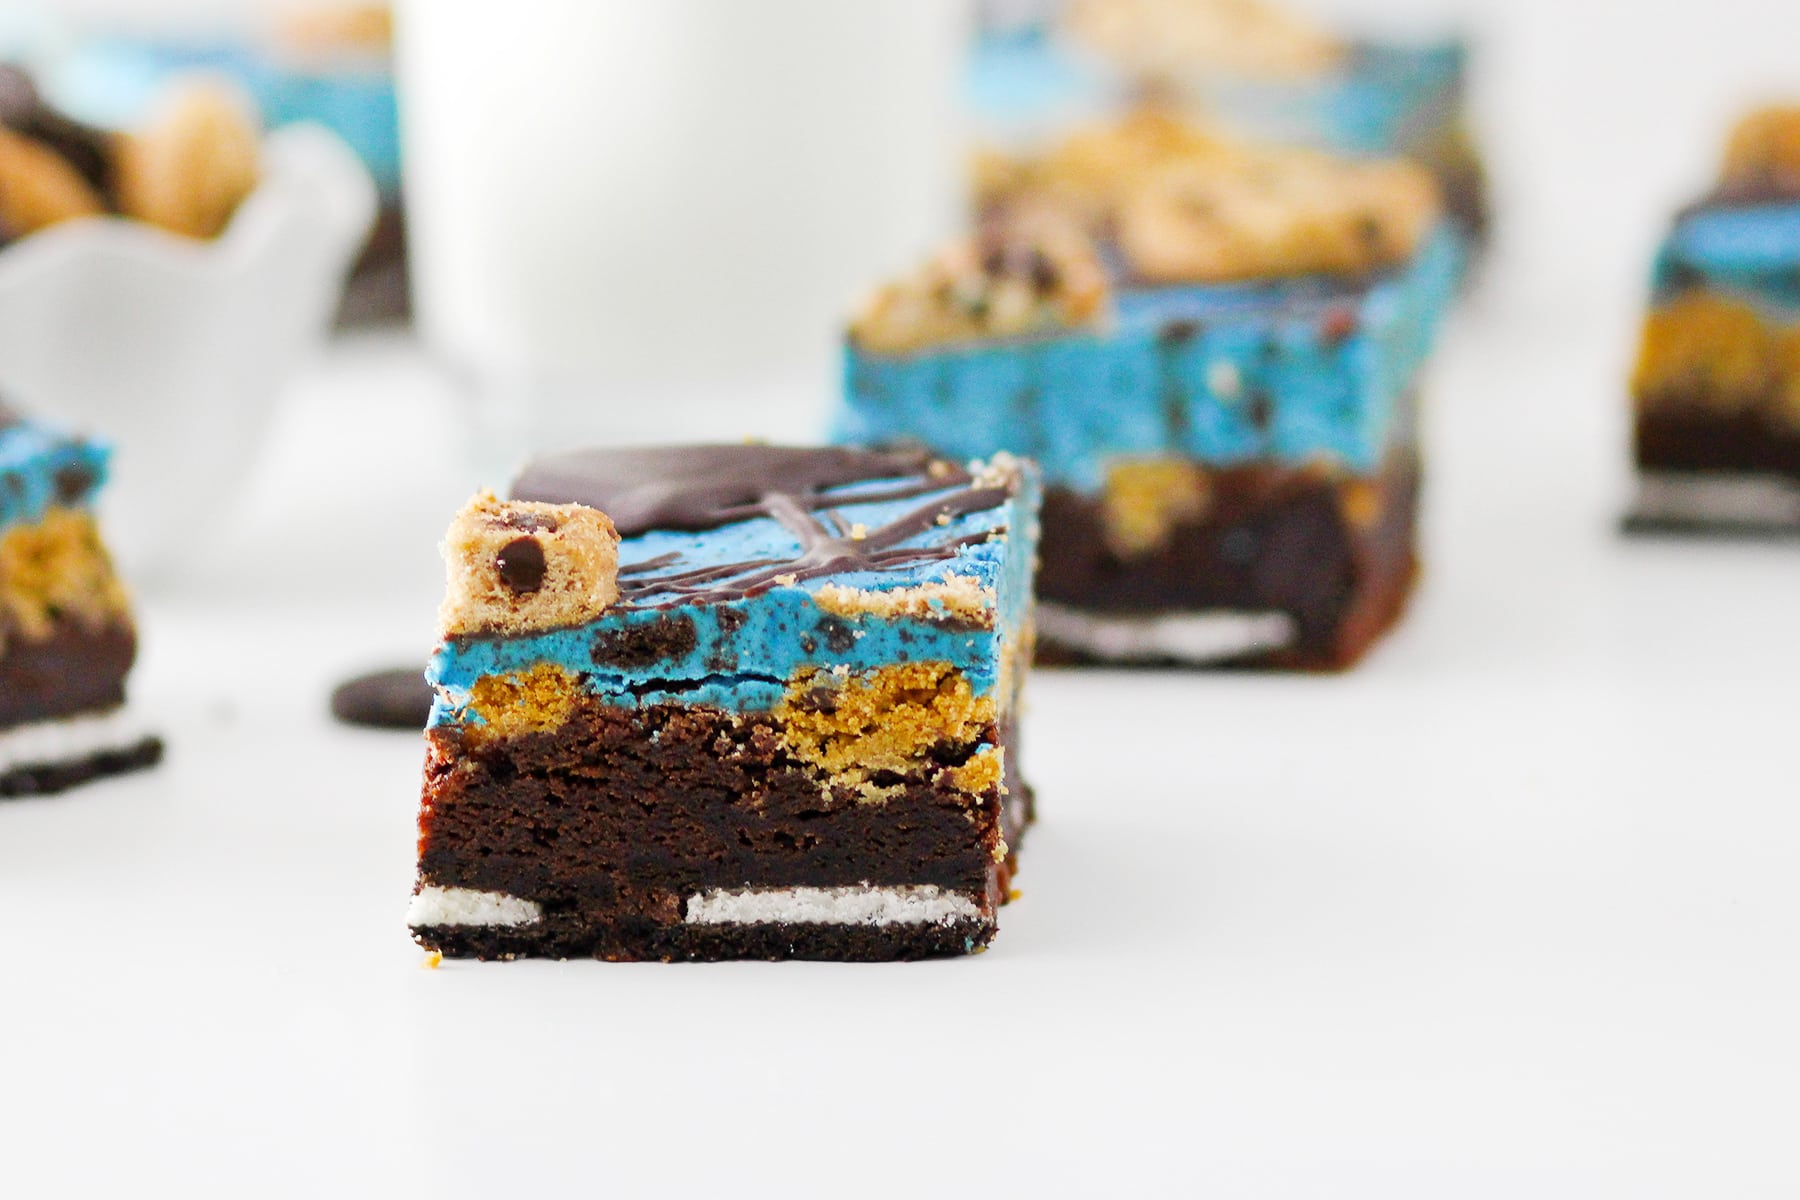 https://food-fanatic-res.cloudinary.com/iu/s---ItScGkO--/f_auto,q_auto/v1479815488/cookie-monster-brownies-photo